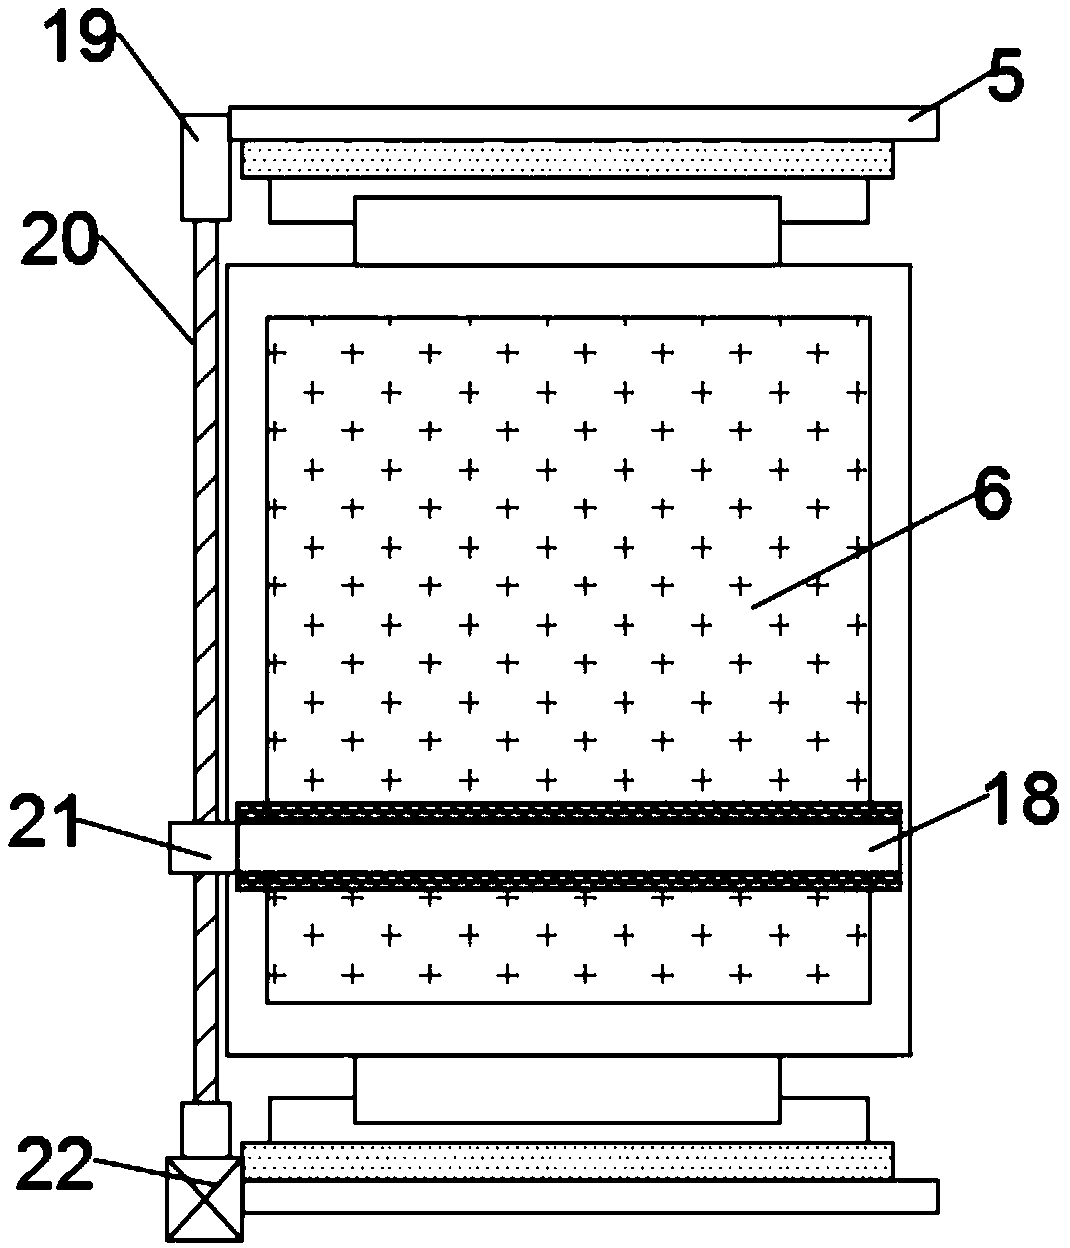 Self-cleaning photovoltaic panel